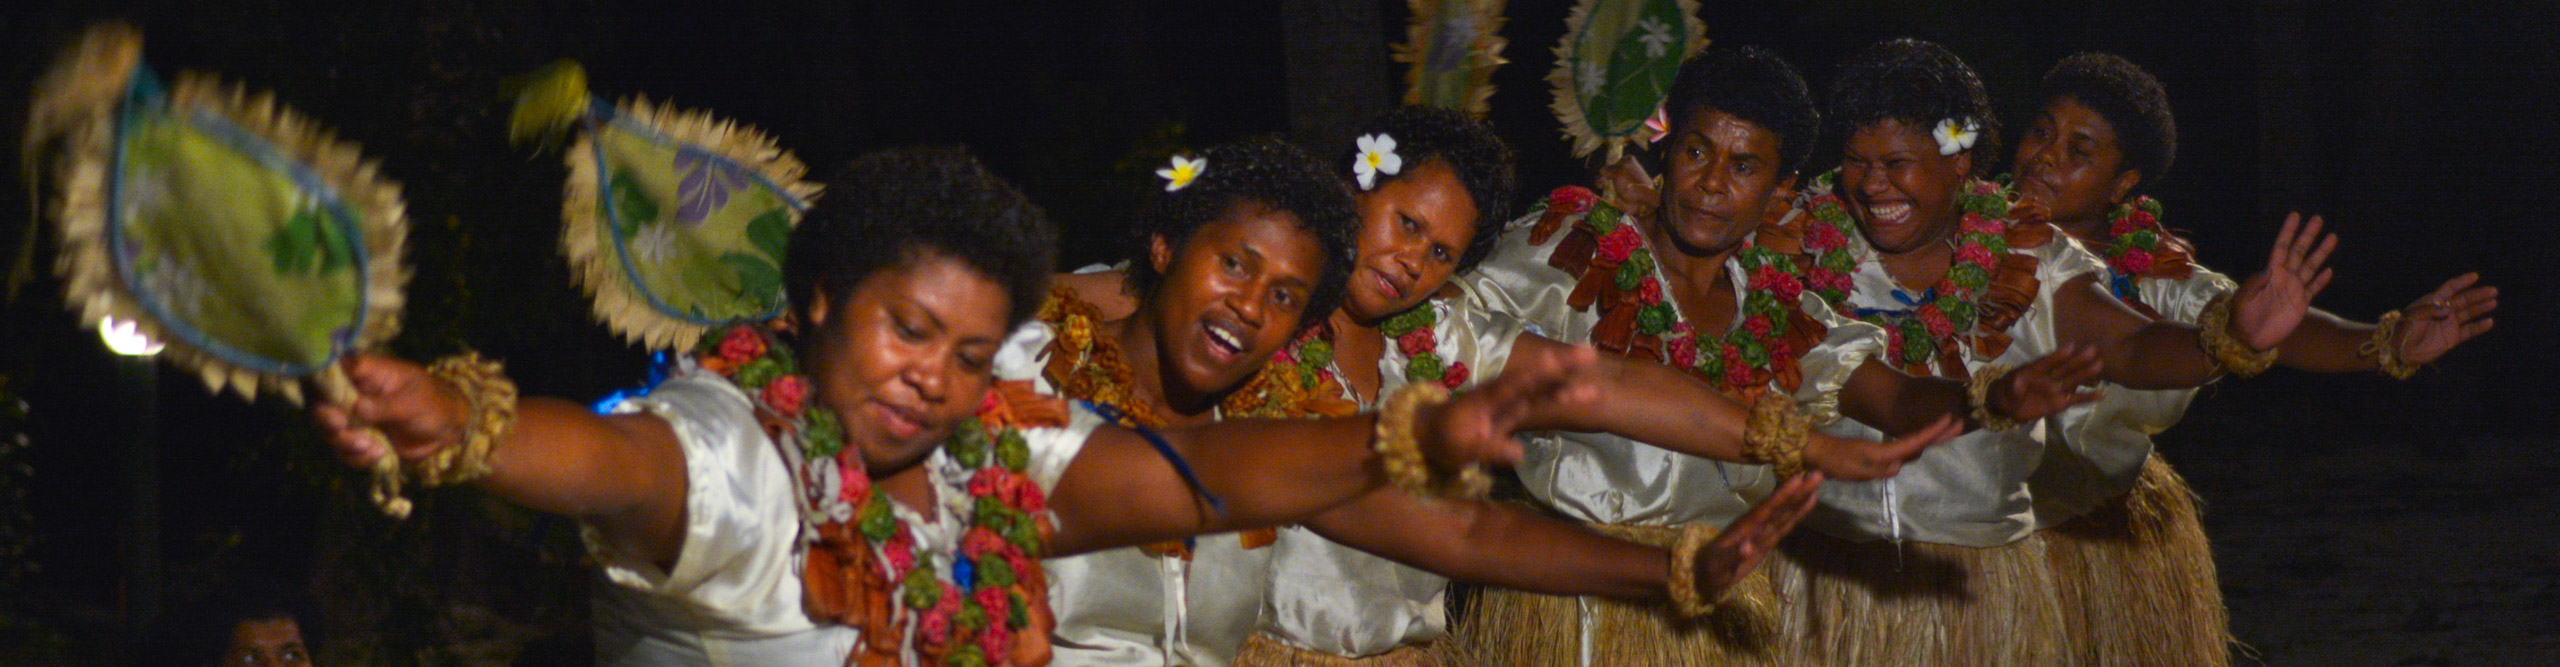 Group of women in traditional clothe dancing on stage in Fiji 